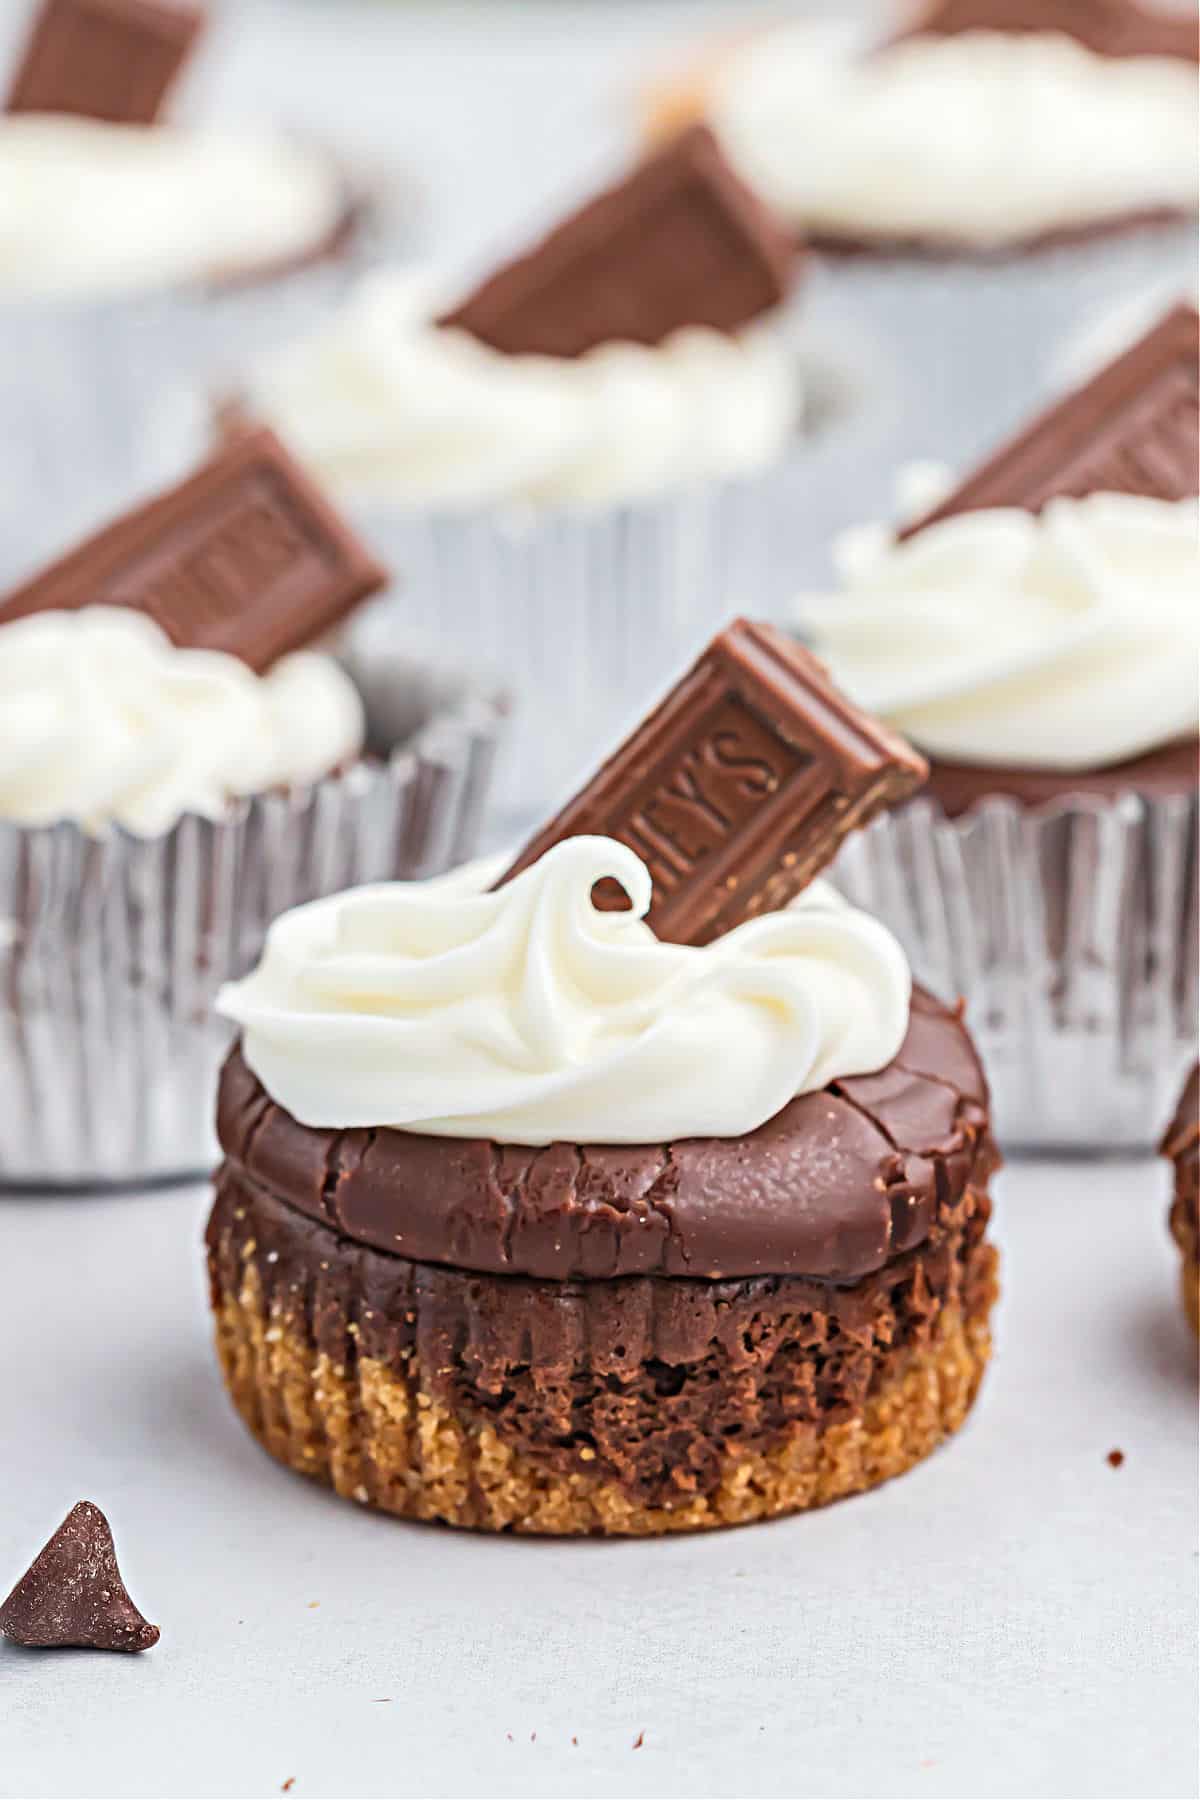 Mini cheesecakes with chocolate ganache and marshmallow frosting.